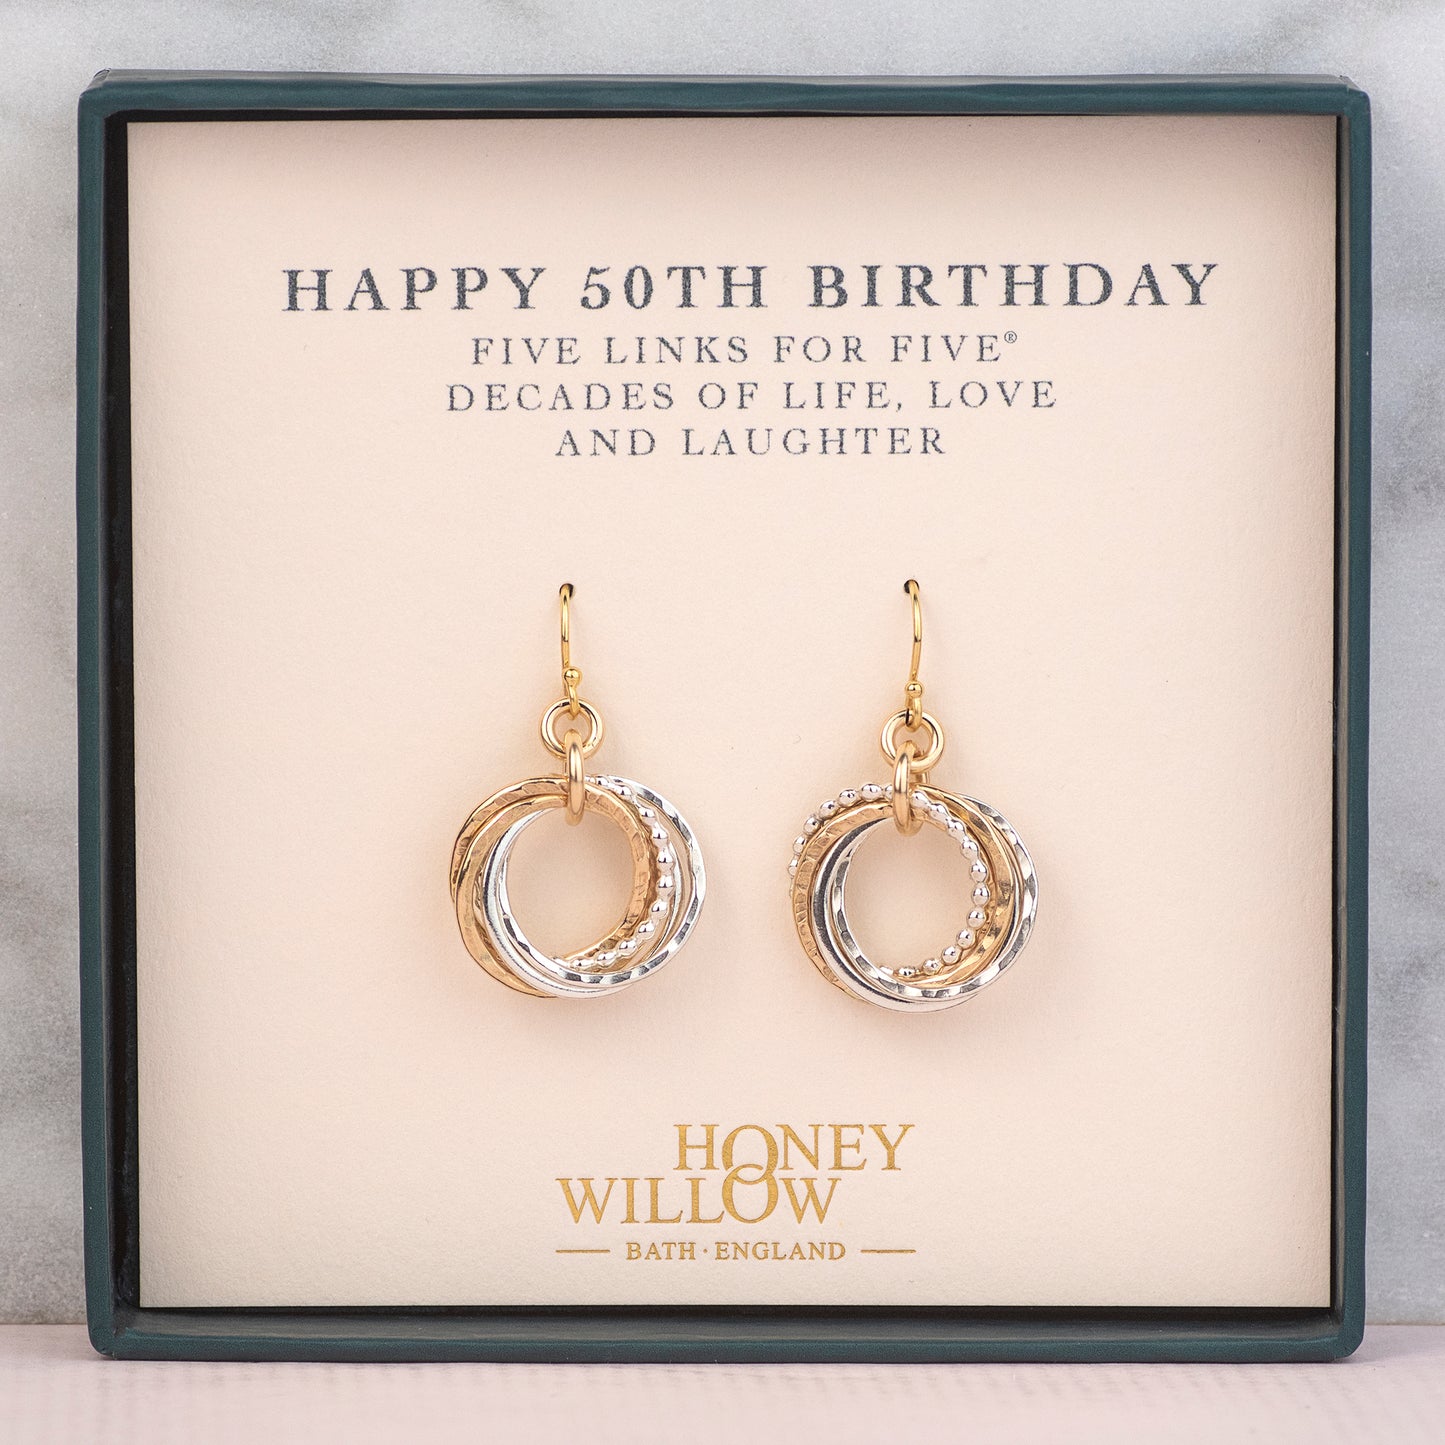 50th Birthday Earrings - Petite Mixed Metal - 5 Links for 5 Decades Earrings